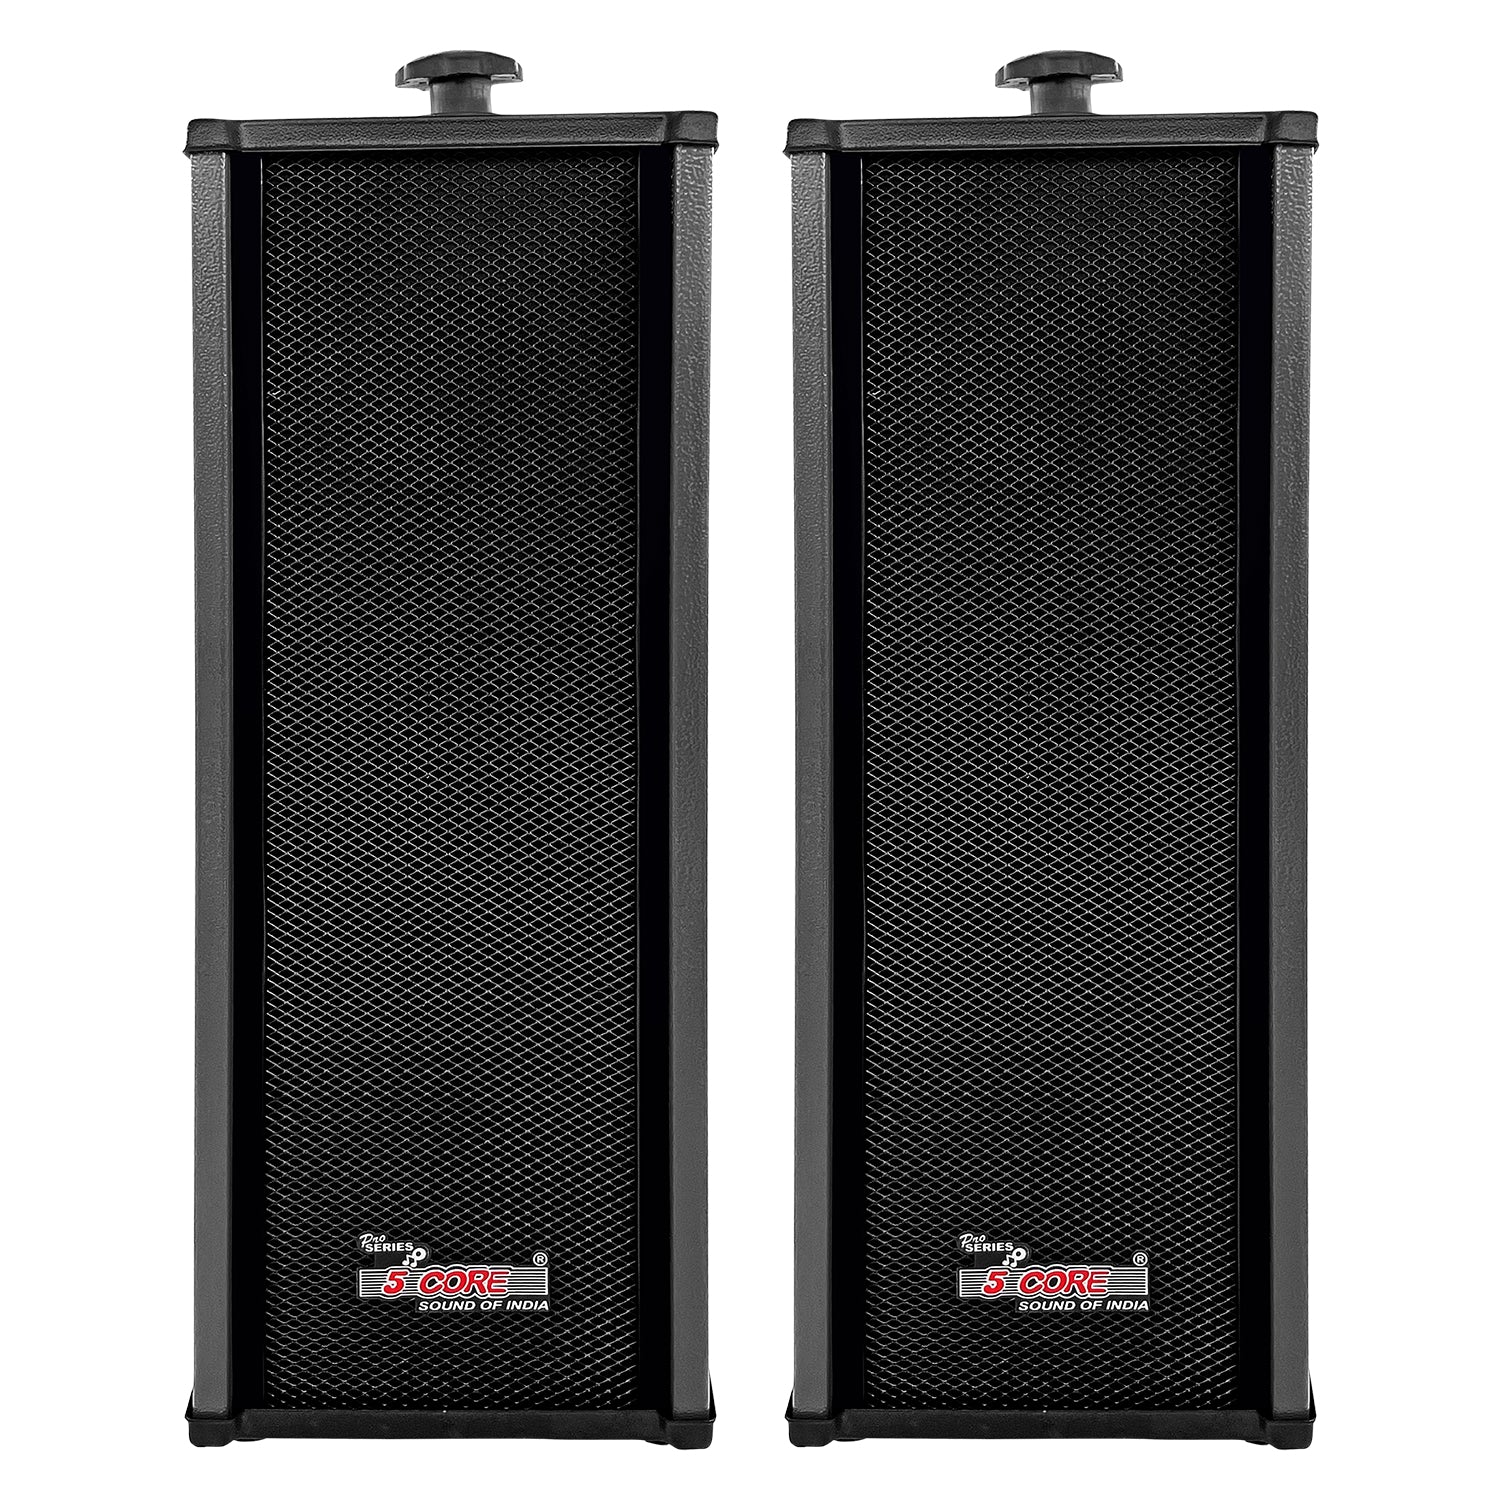 5 Core Outdoor Wall Speakers 2Pack 2 Way 100W PMPO Ceiling Mount Speaker Heavy Duty Enclosure